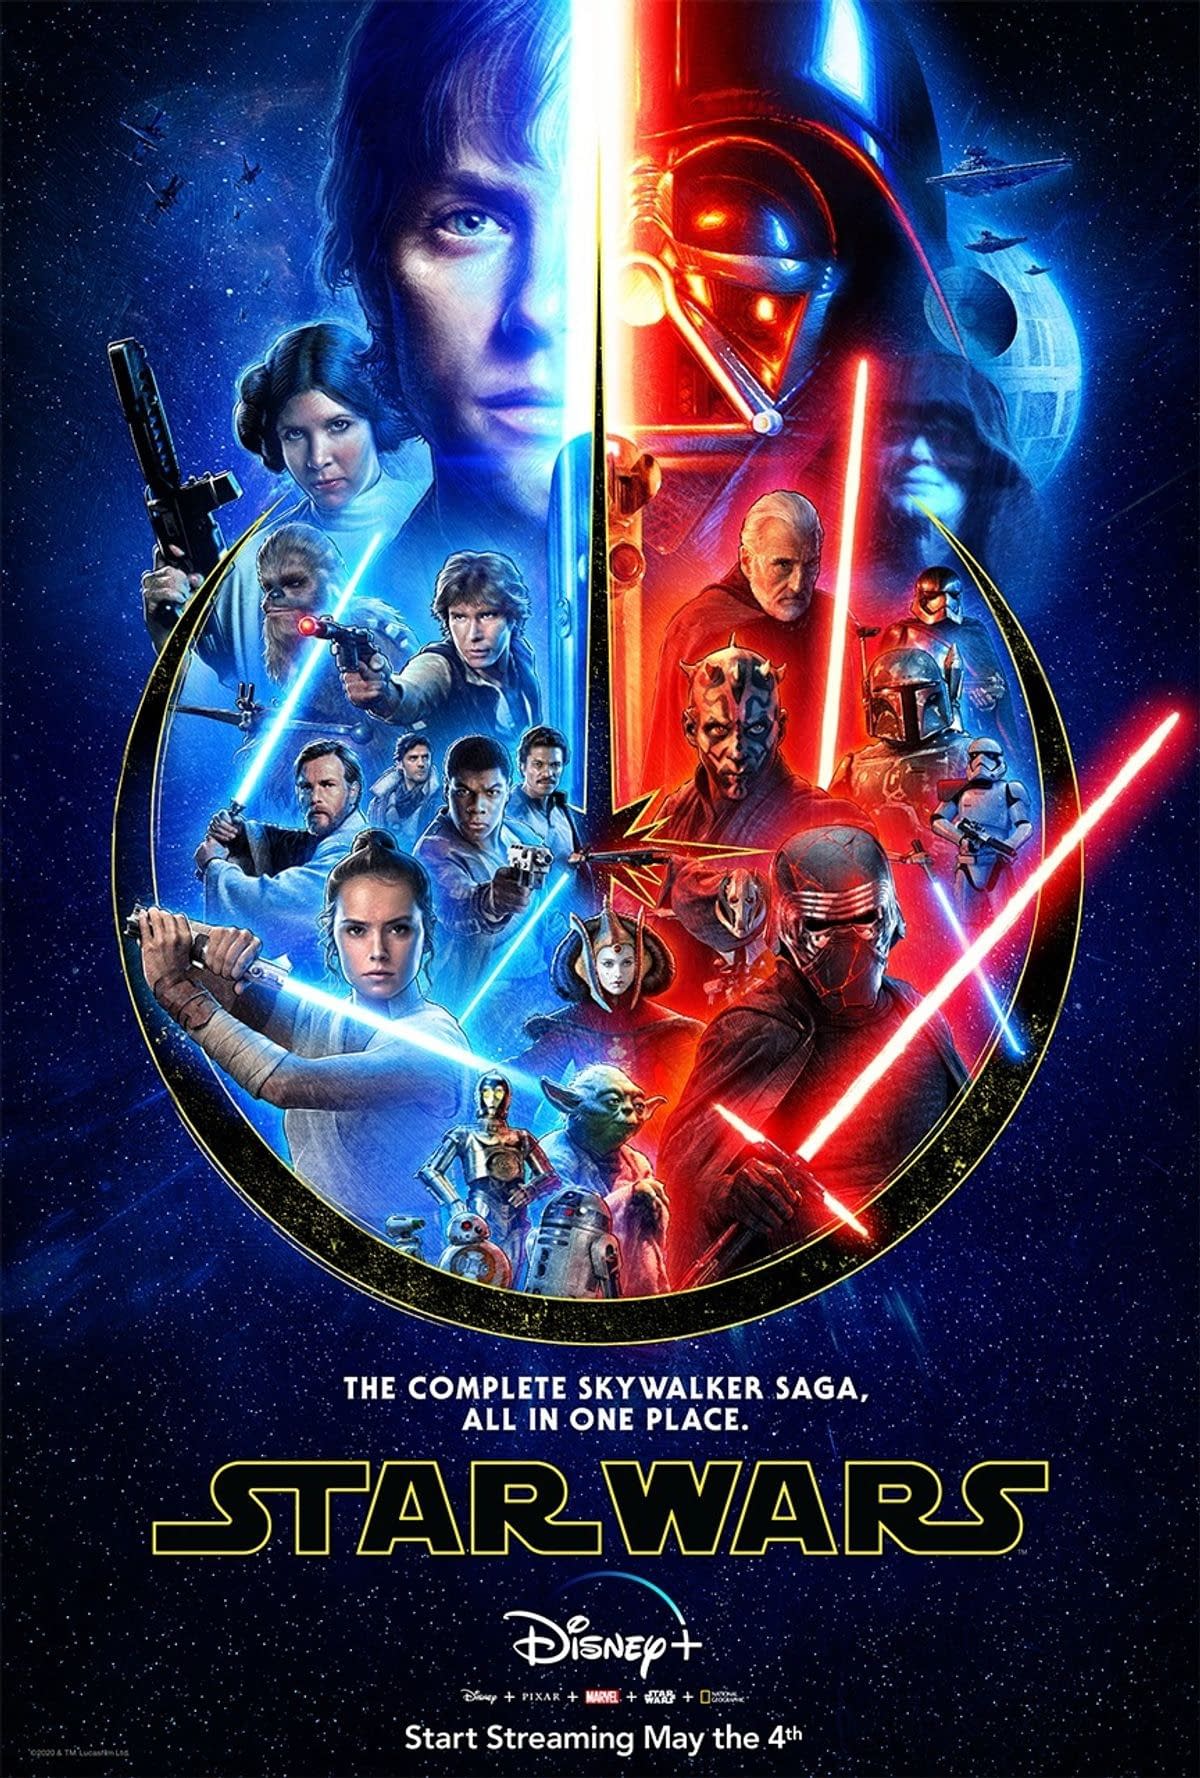 Star Wars: The Last Jedi Theatrical Poster Revealed